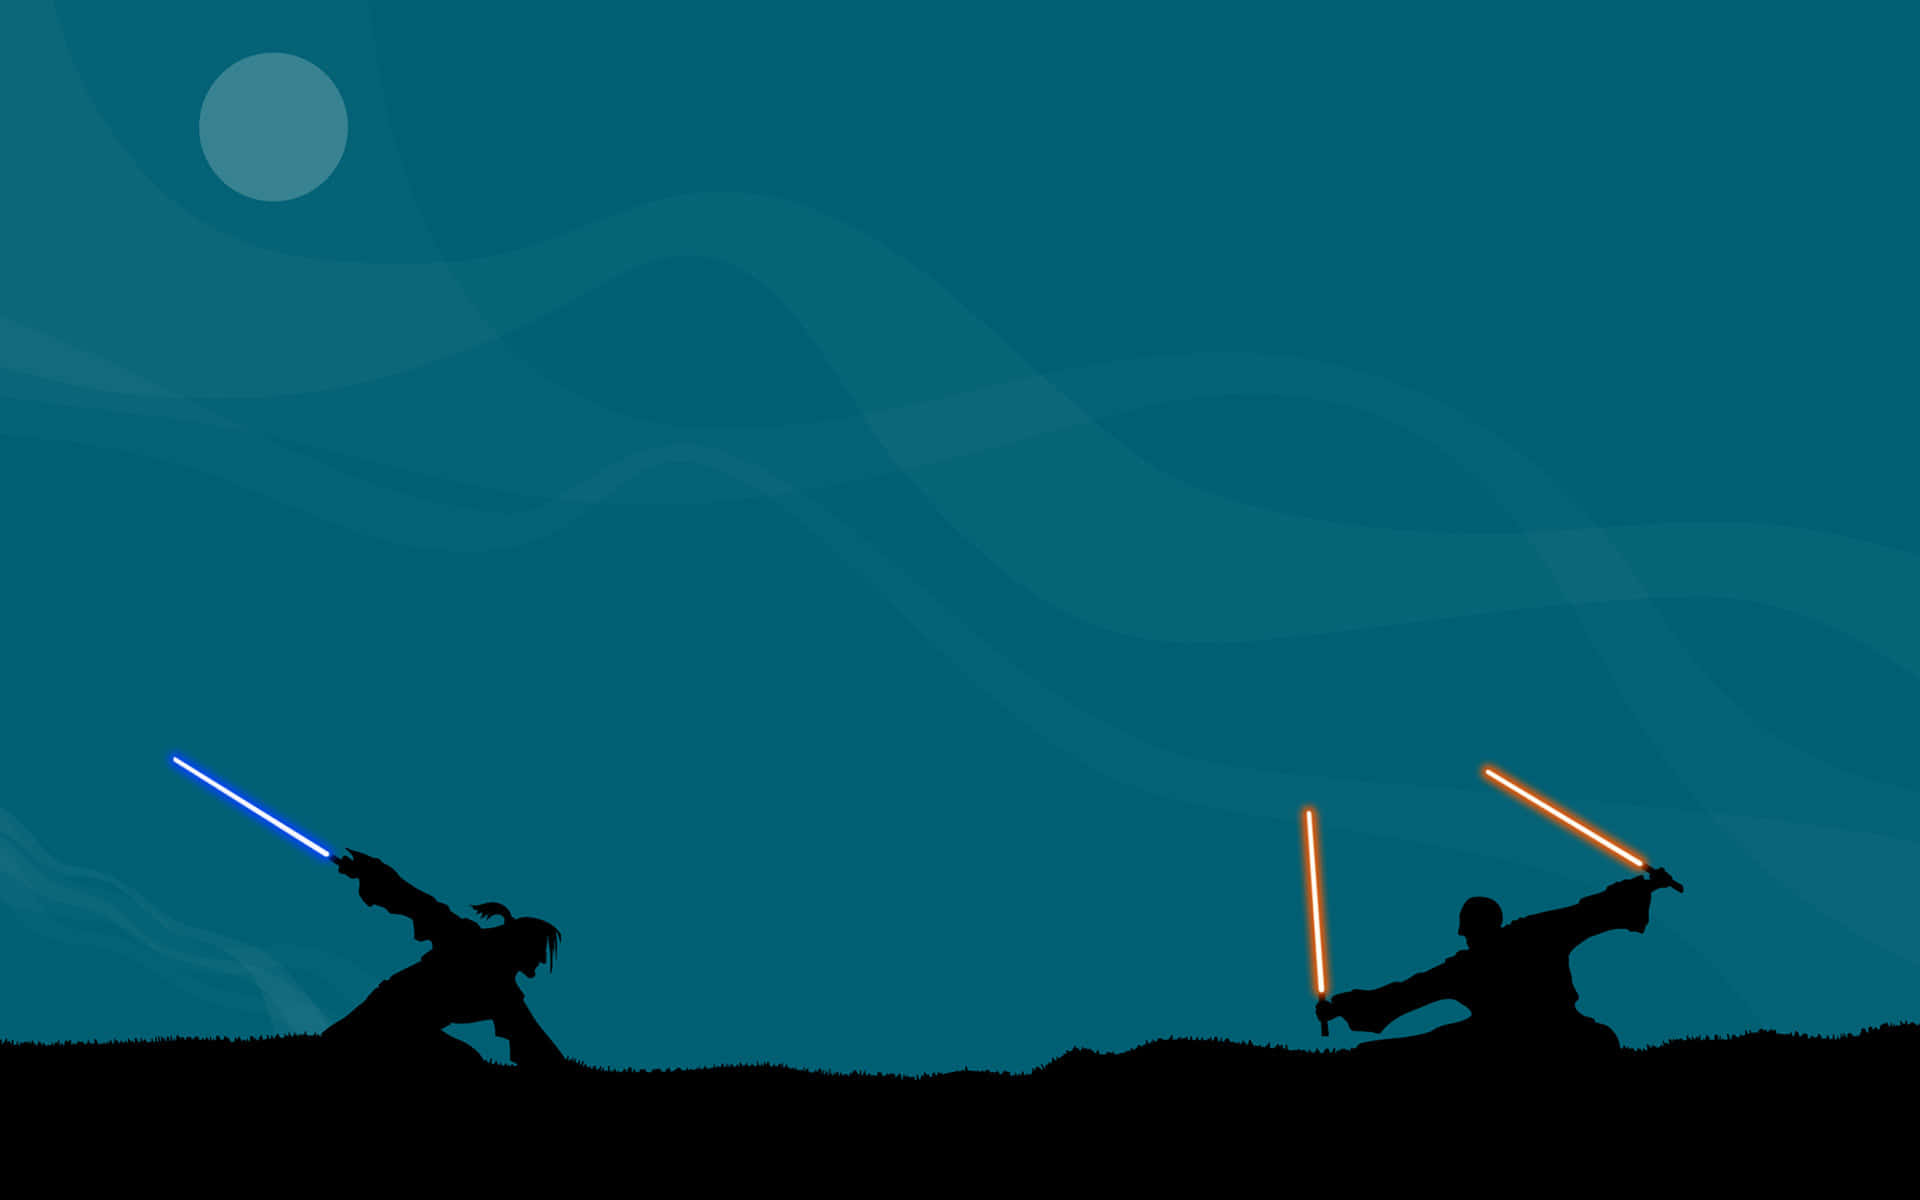 Epic Lightsaber Duel Between Iconic Star Wars Characters Wallpaper